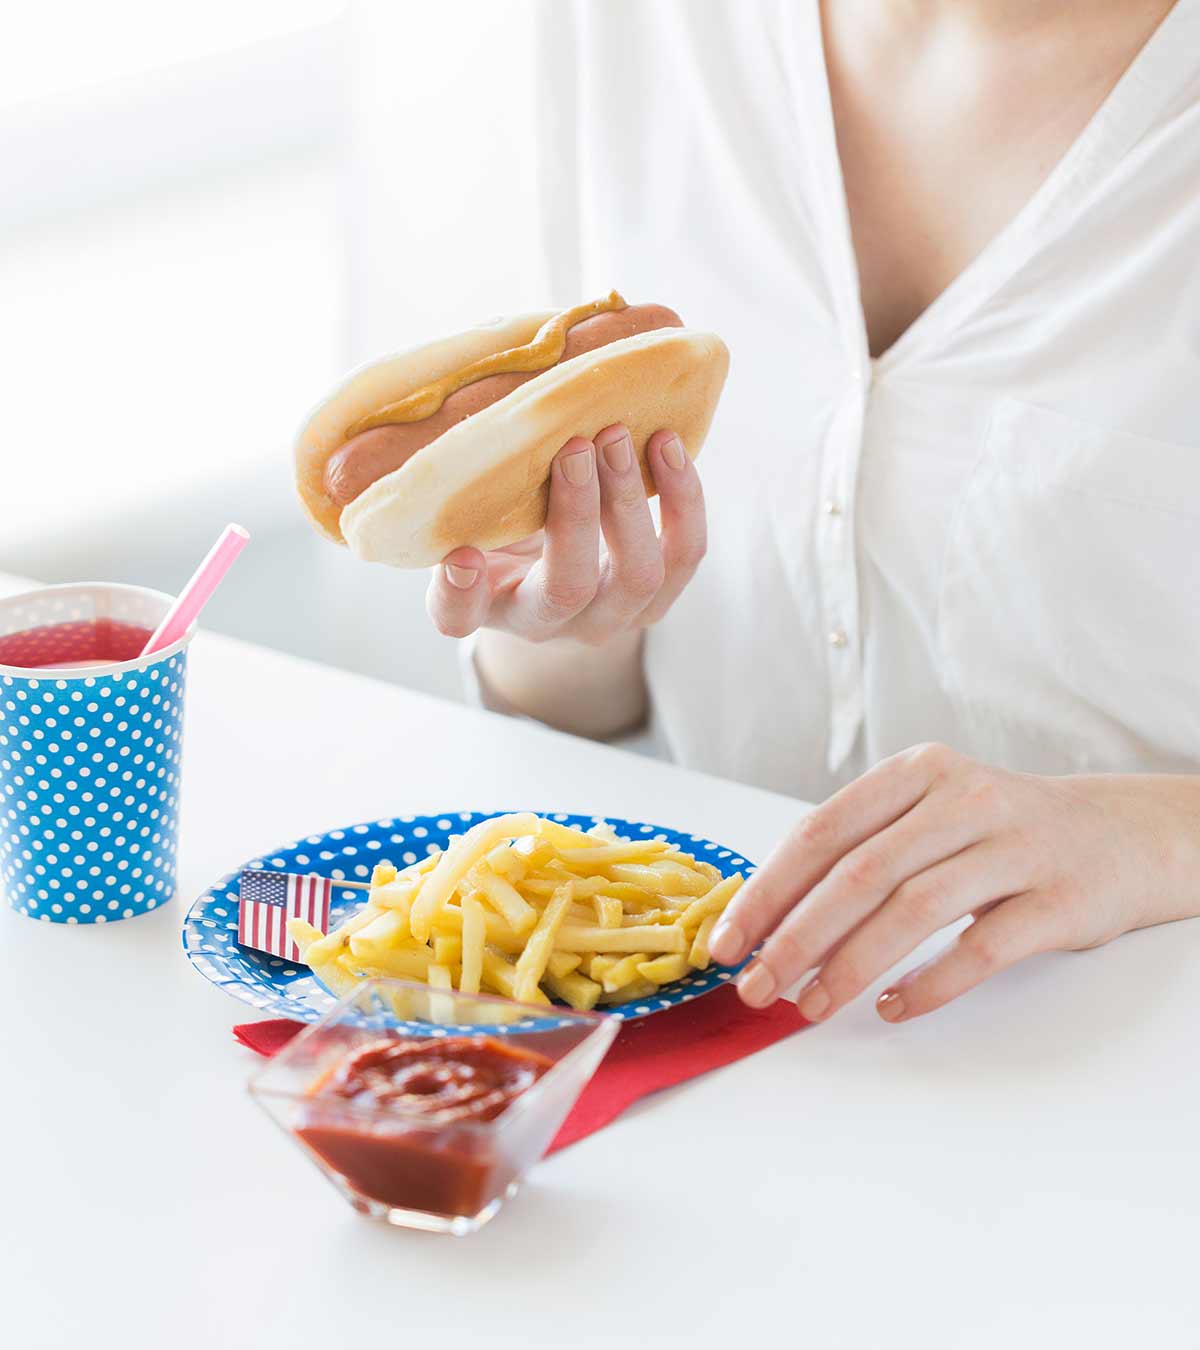 Is It Safe To Eat Hot Dogs During Pregnancy?